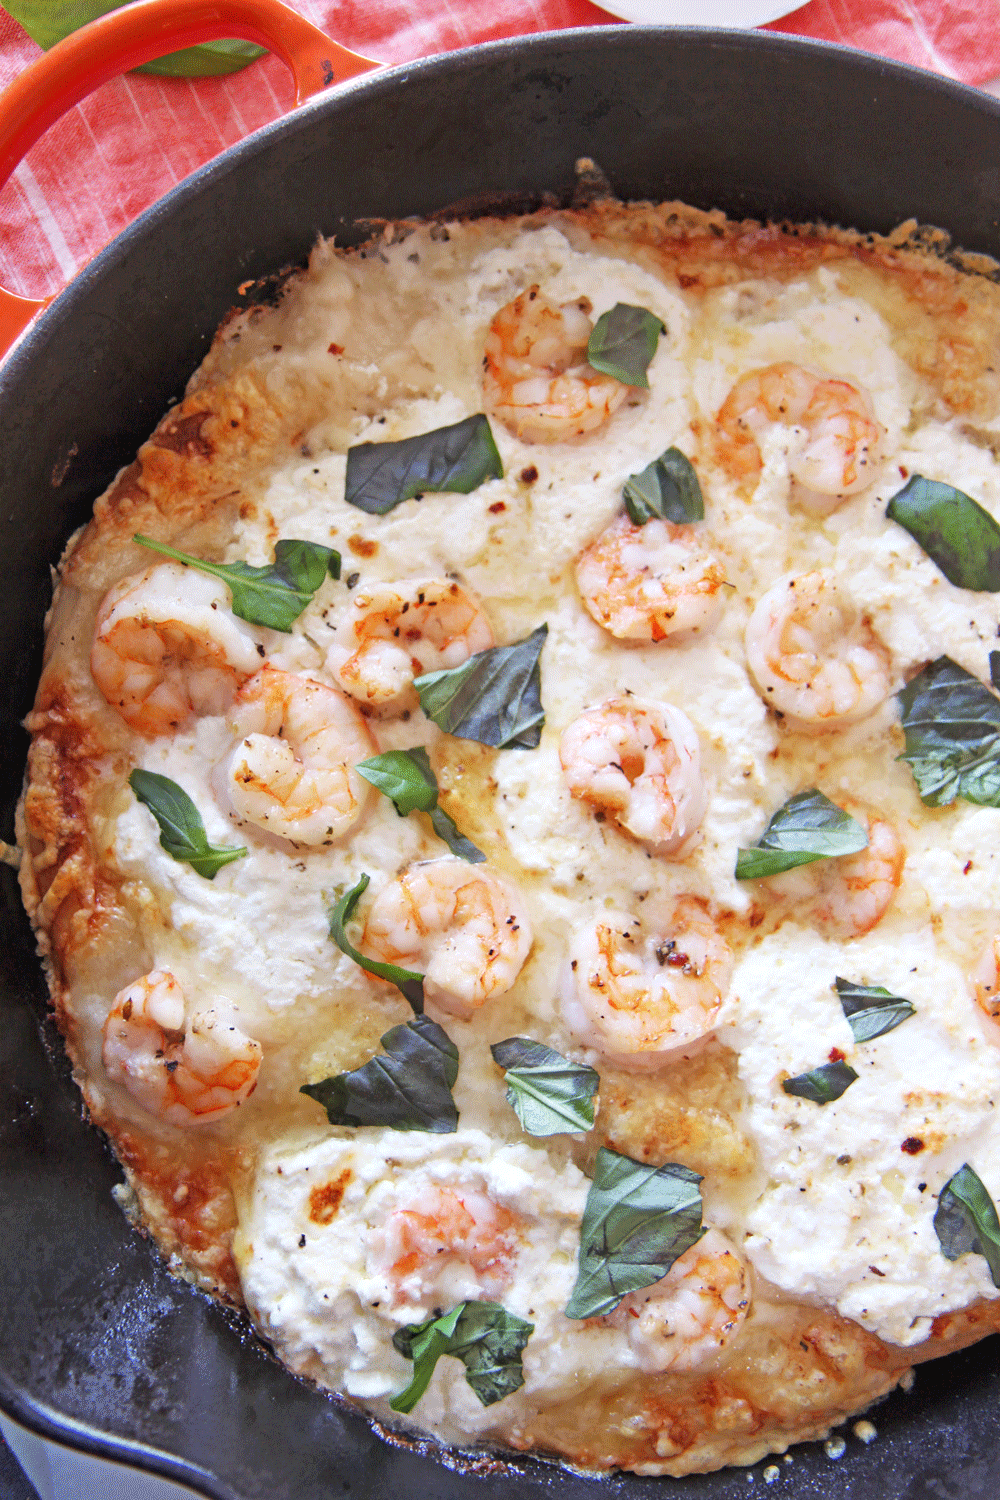 Shrimp Scampi Pizza in a Cast Iron Pan. This is the perfect one pan dinner that is done in 10 minutes. You cook the pizza in a cast iron pan for crispy cheesy crust. Happy Pizza Making! www.ChopHappy.com #Howtomakehomemadepizza #shrimpscampi